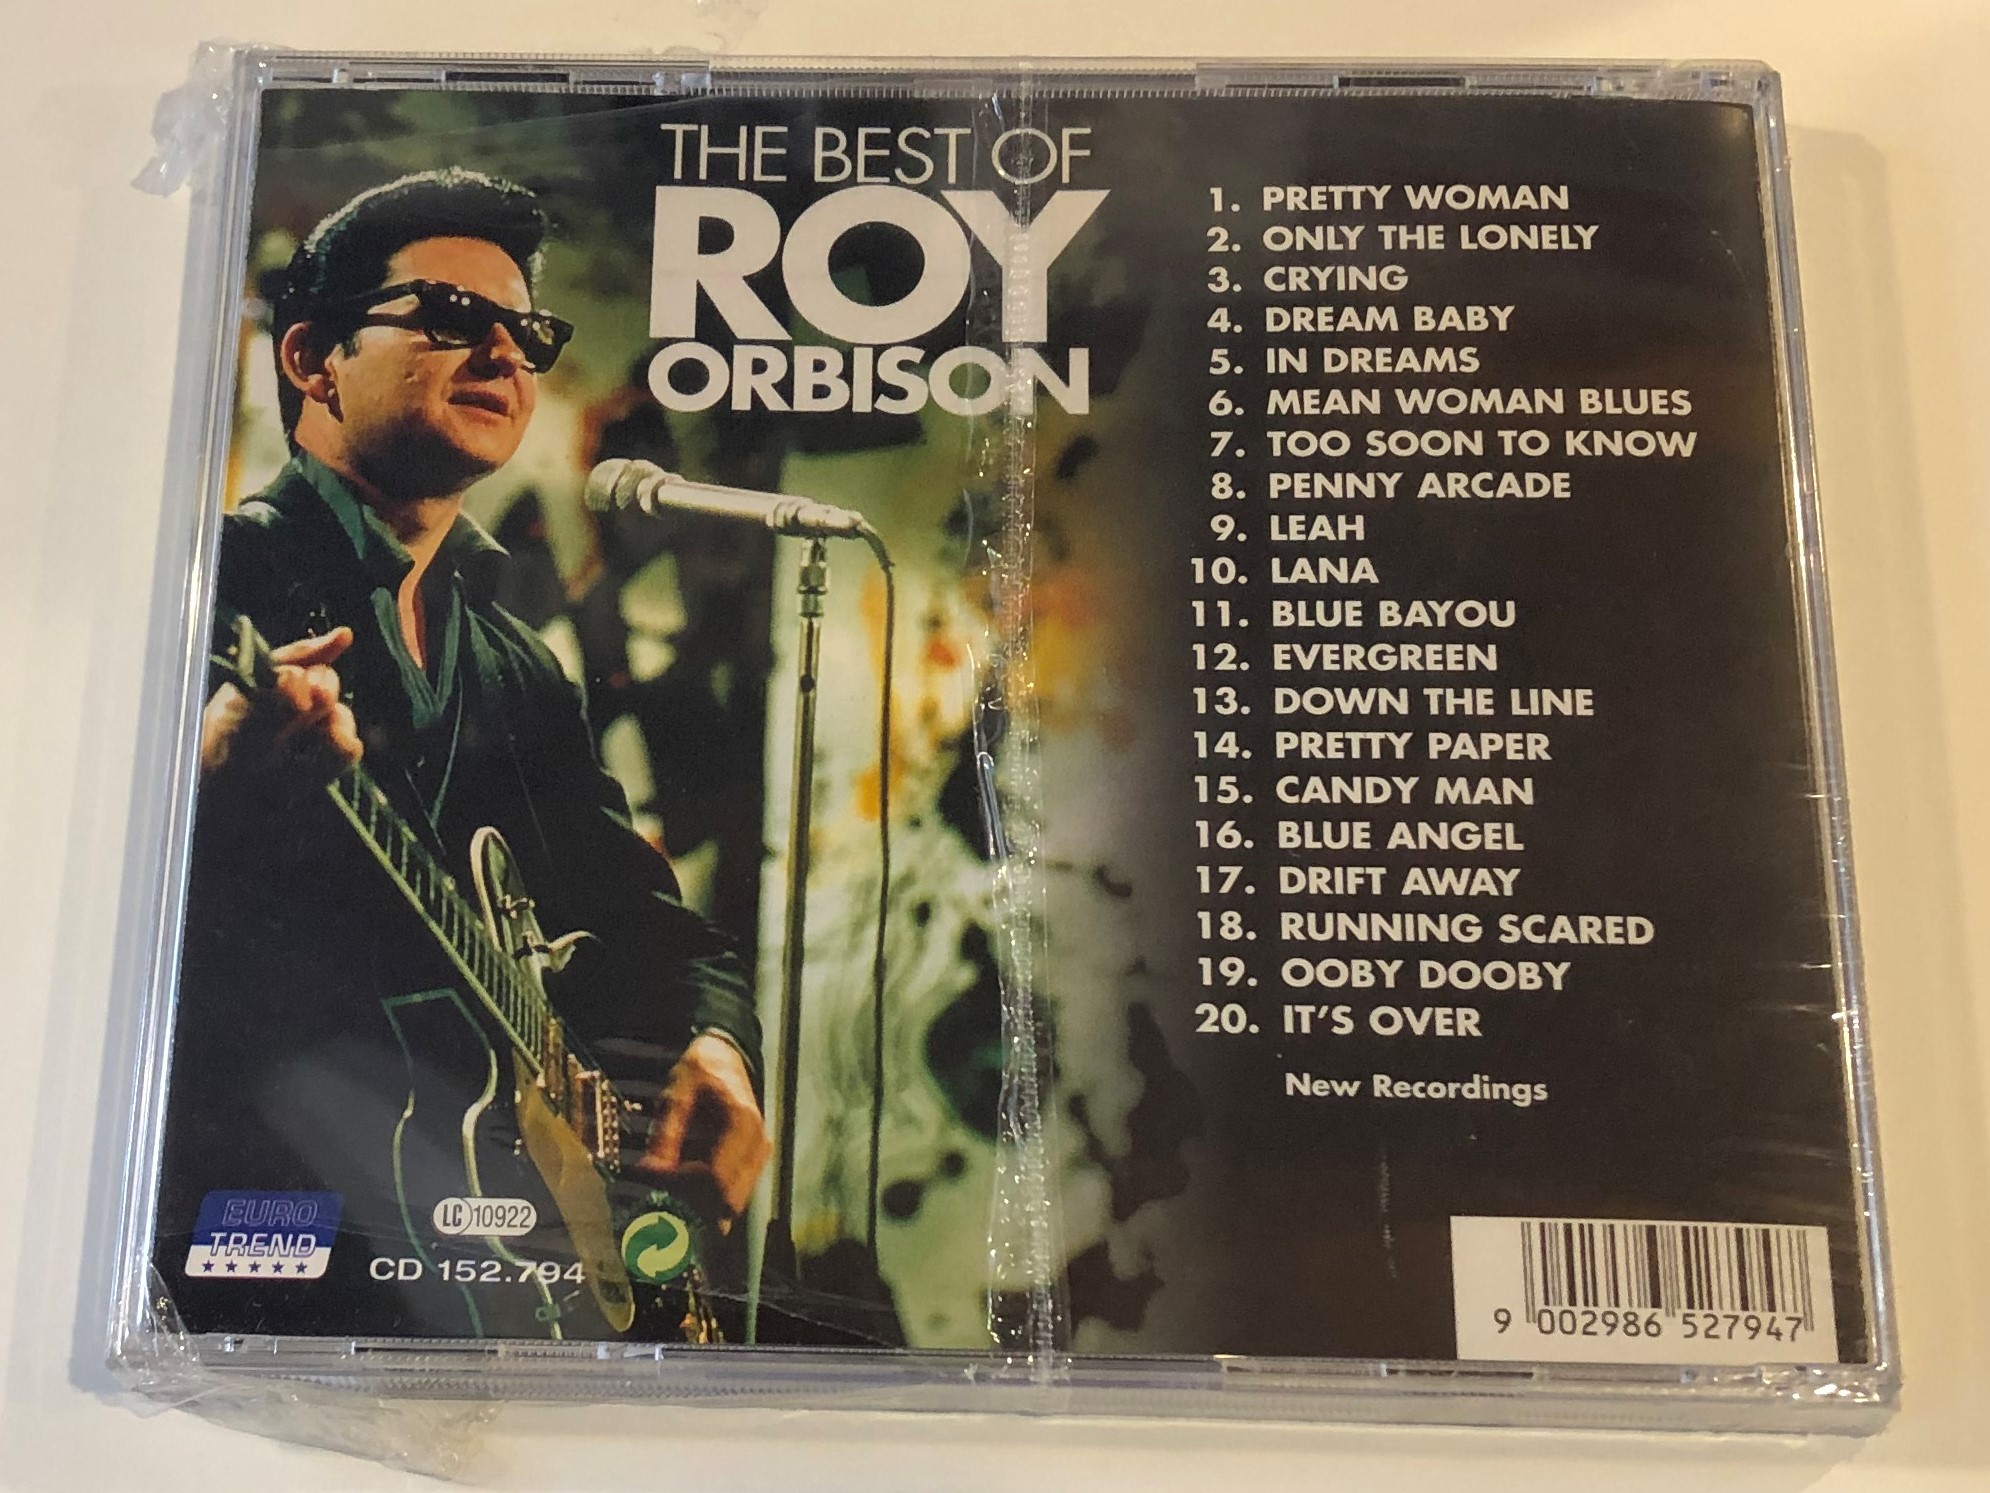 the-best-of-roy-orbison-pretty-woman-only-the-lonely-blue-bayou-a.m.o.-eurotrend-audio-cd-cd-152-2-.jpg